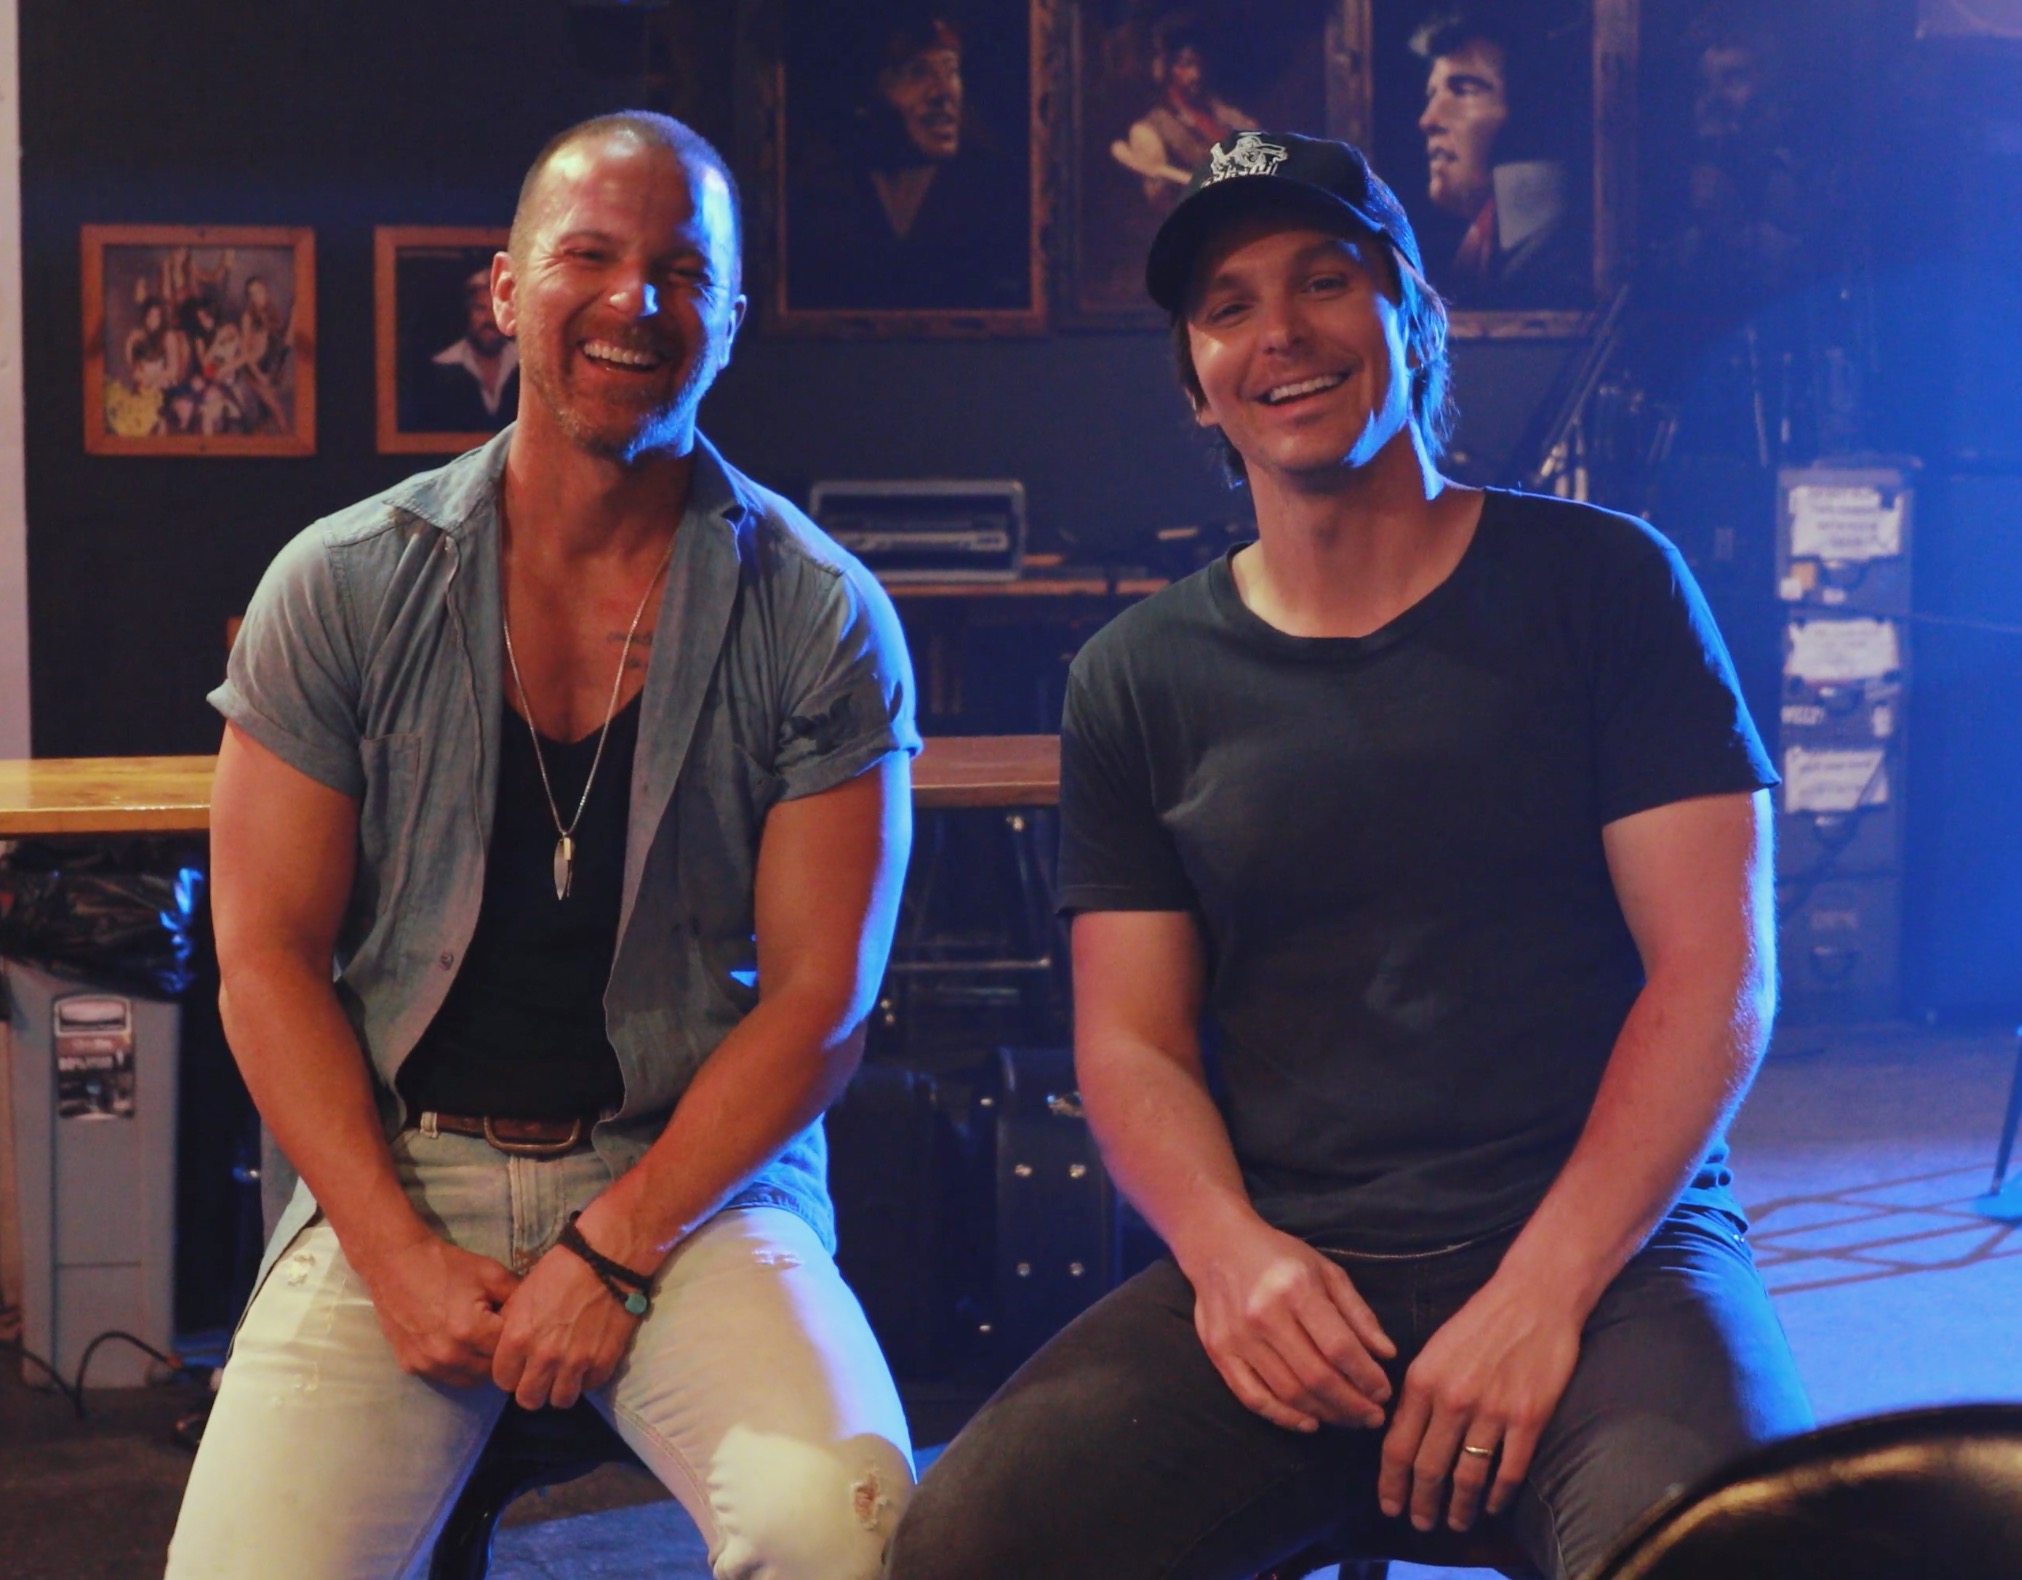 WATCH NOW: CHARLIE WORSHAM, KIP MOORE BRING THE PARTY TO “KISS LIKE YOU DANCE” OFFICIAL MUSIC VIDEO